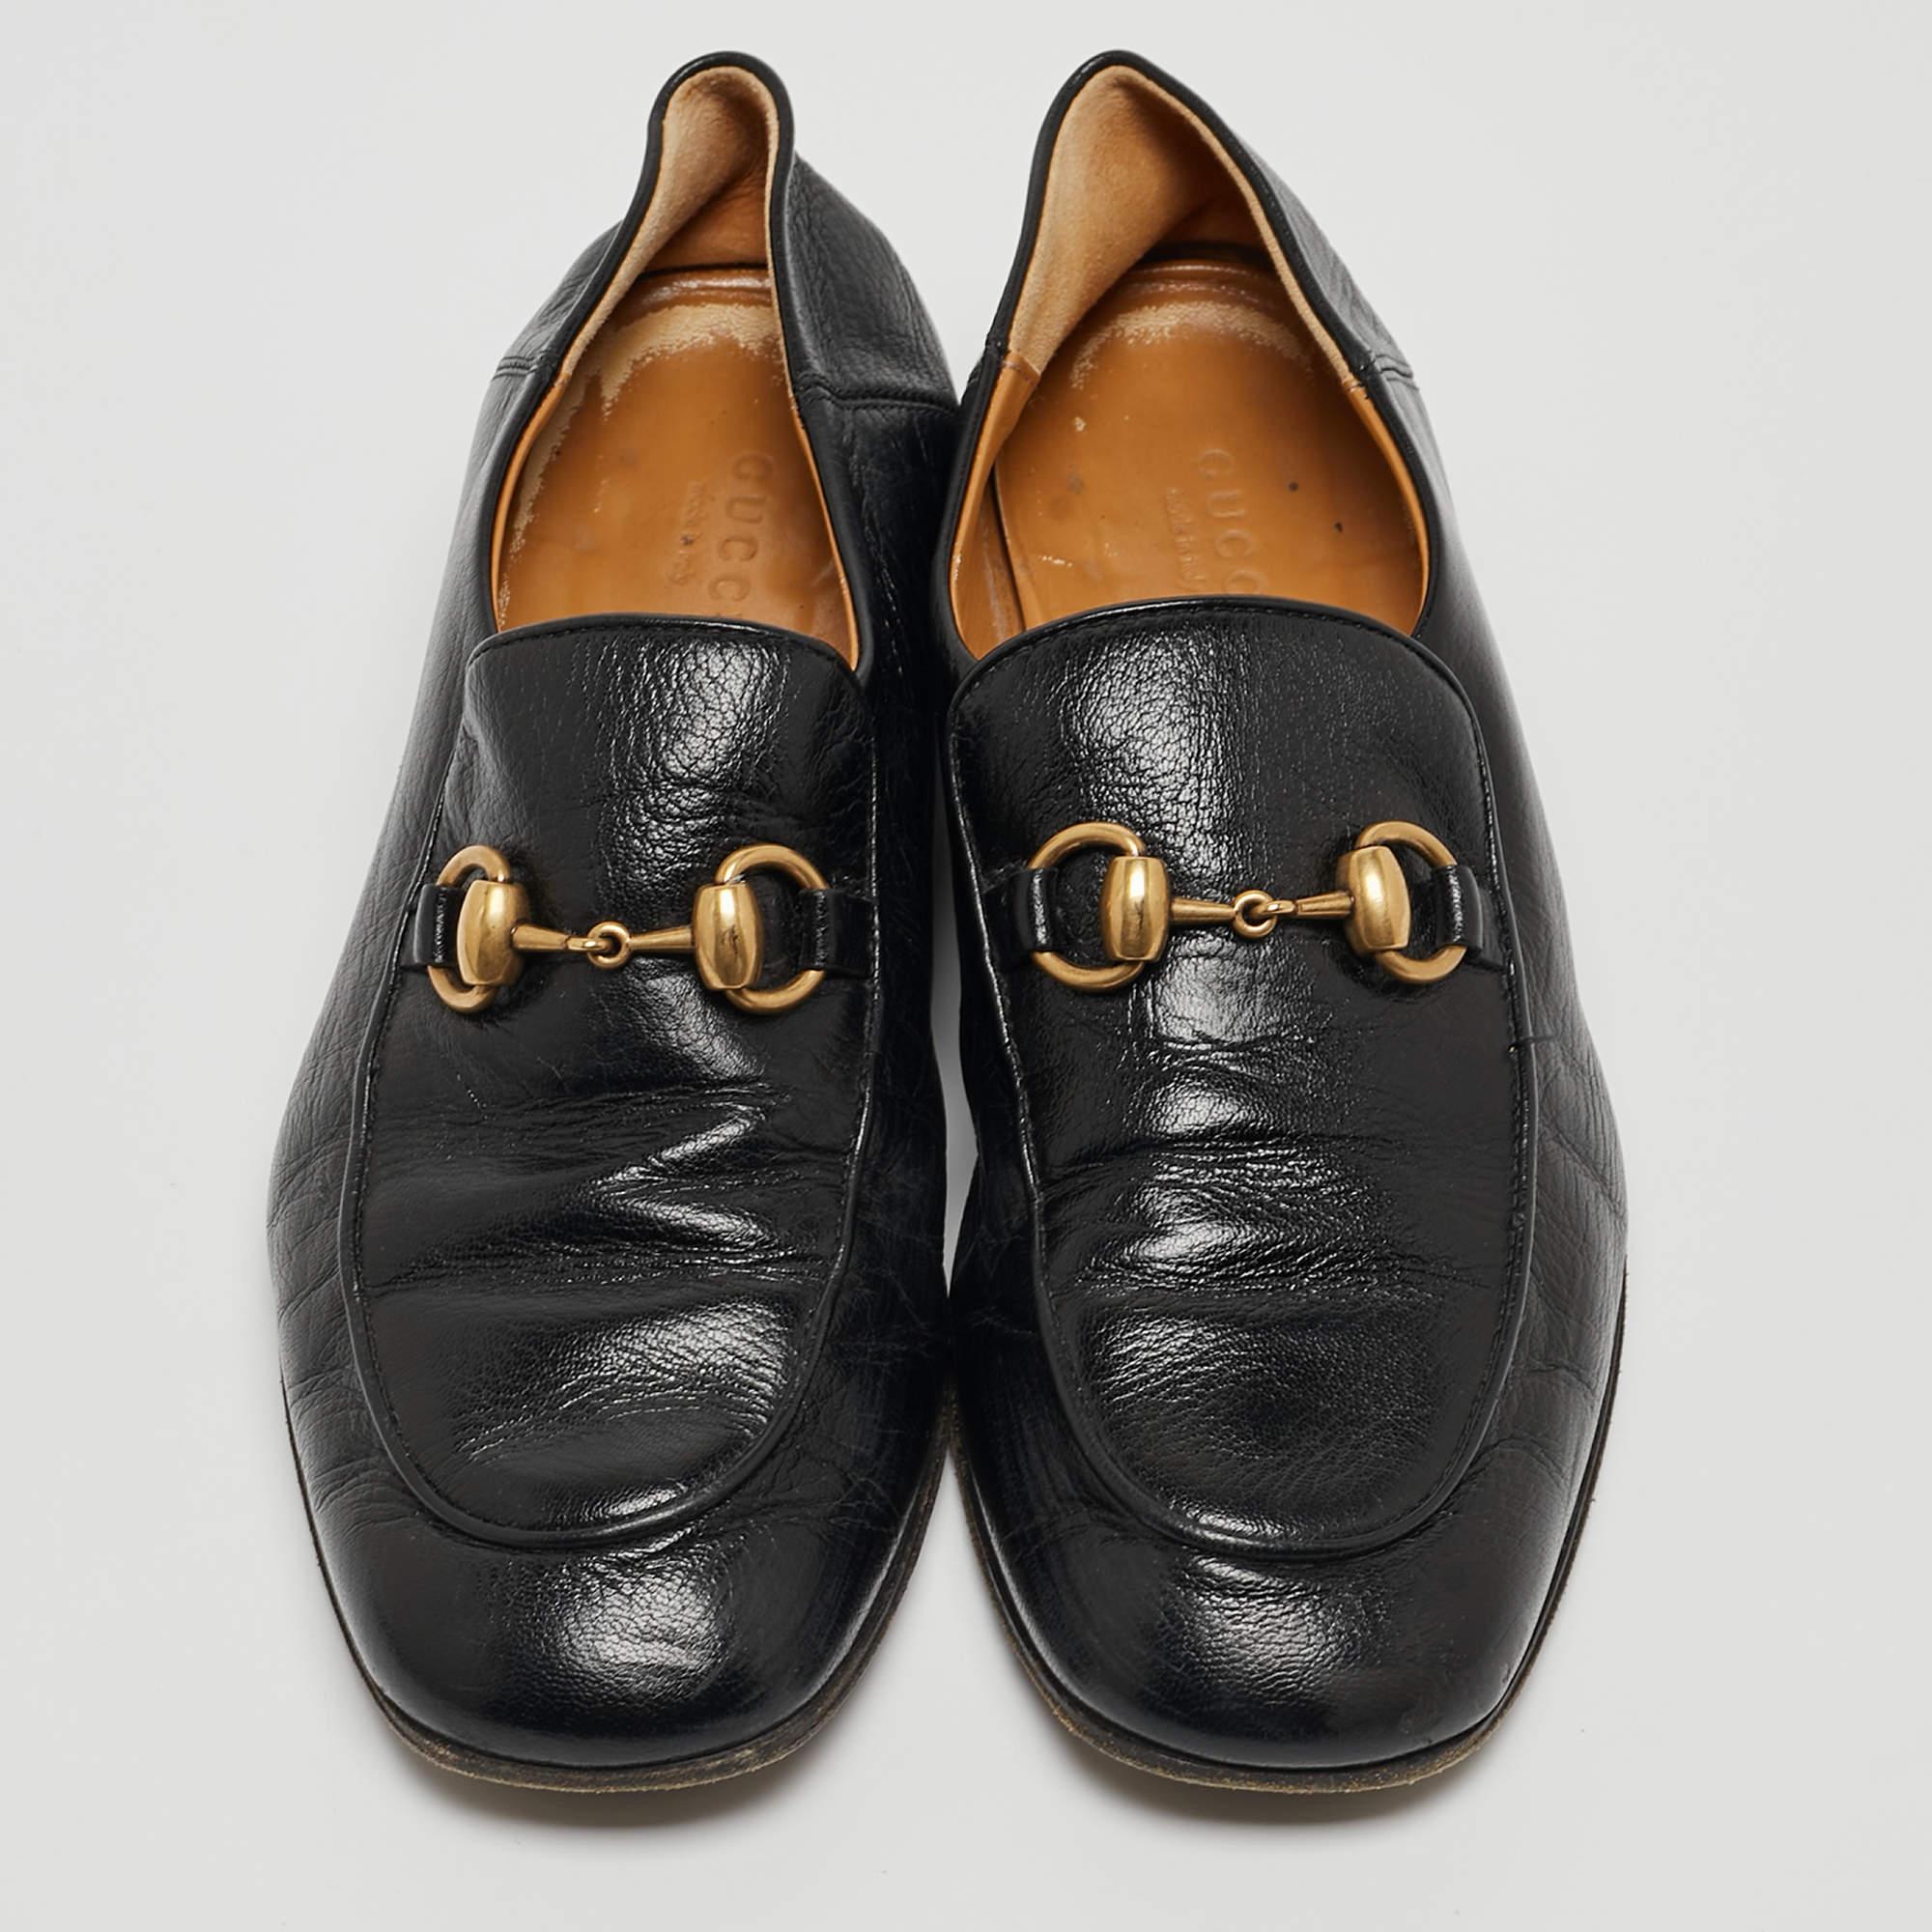 Gucci Black Leather Horsebit Loafers Size 36.5 For Sale 4